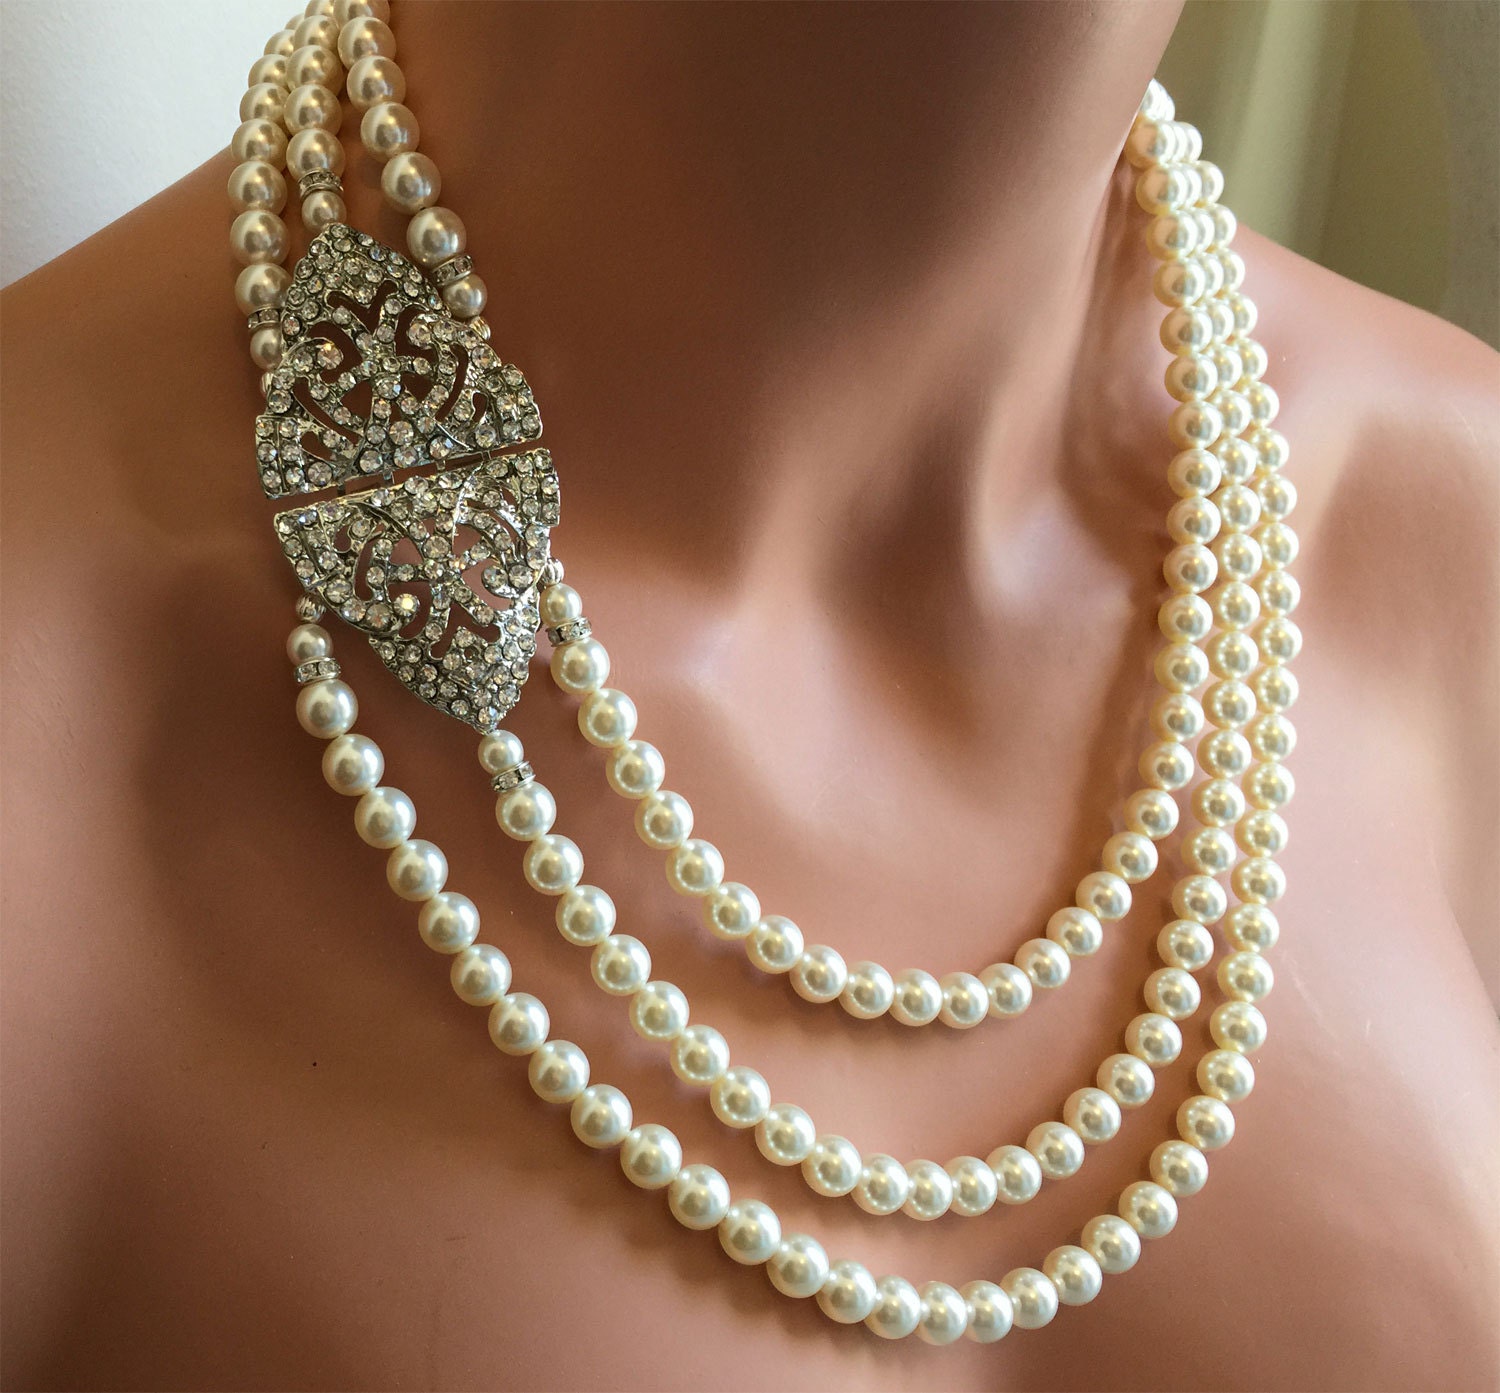 Great Gatsby Pearl Necklace with Art Deco by AlexiBlackwellBridal